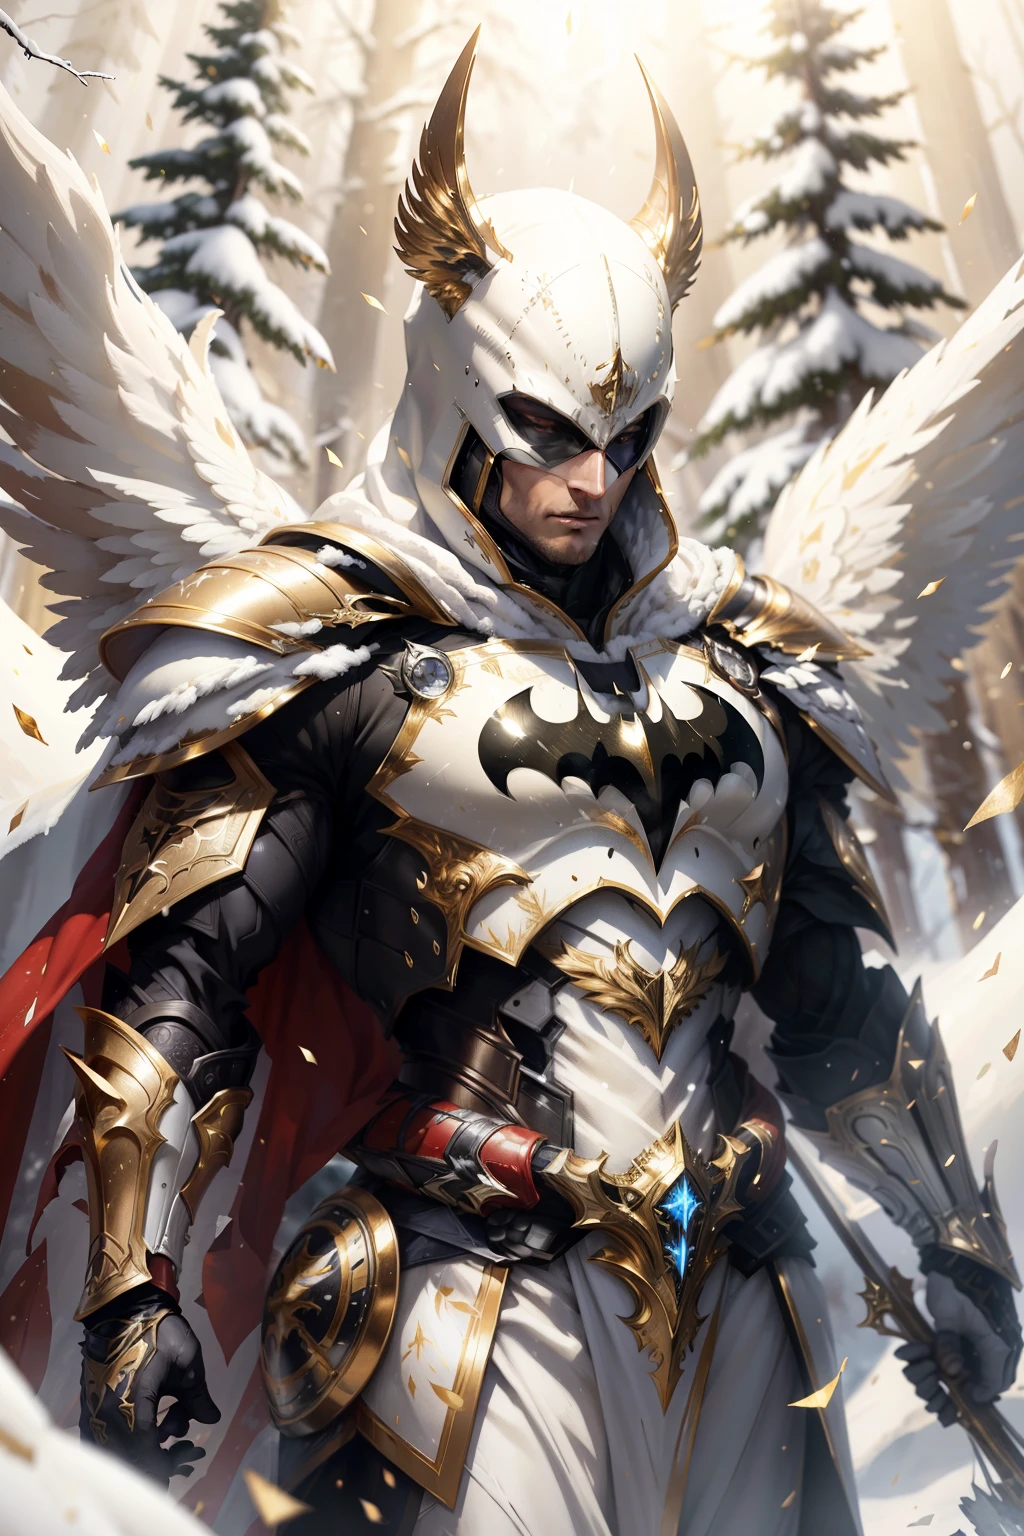 Batman full body on a white, gold and red armor suit, on a white snow forest, snow falling over the armor, the sin shines over the armor suit, hyper realistic, photorealistic, intricate fabric details, needlepoint vining elements, photo realism, 24k resolution, hyper detail art style on Leonardo Da Vinci  an award winning photo